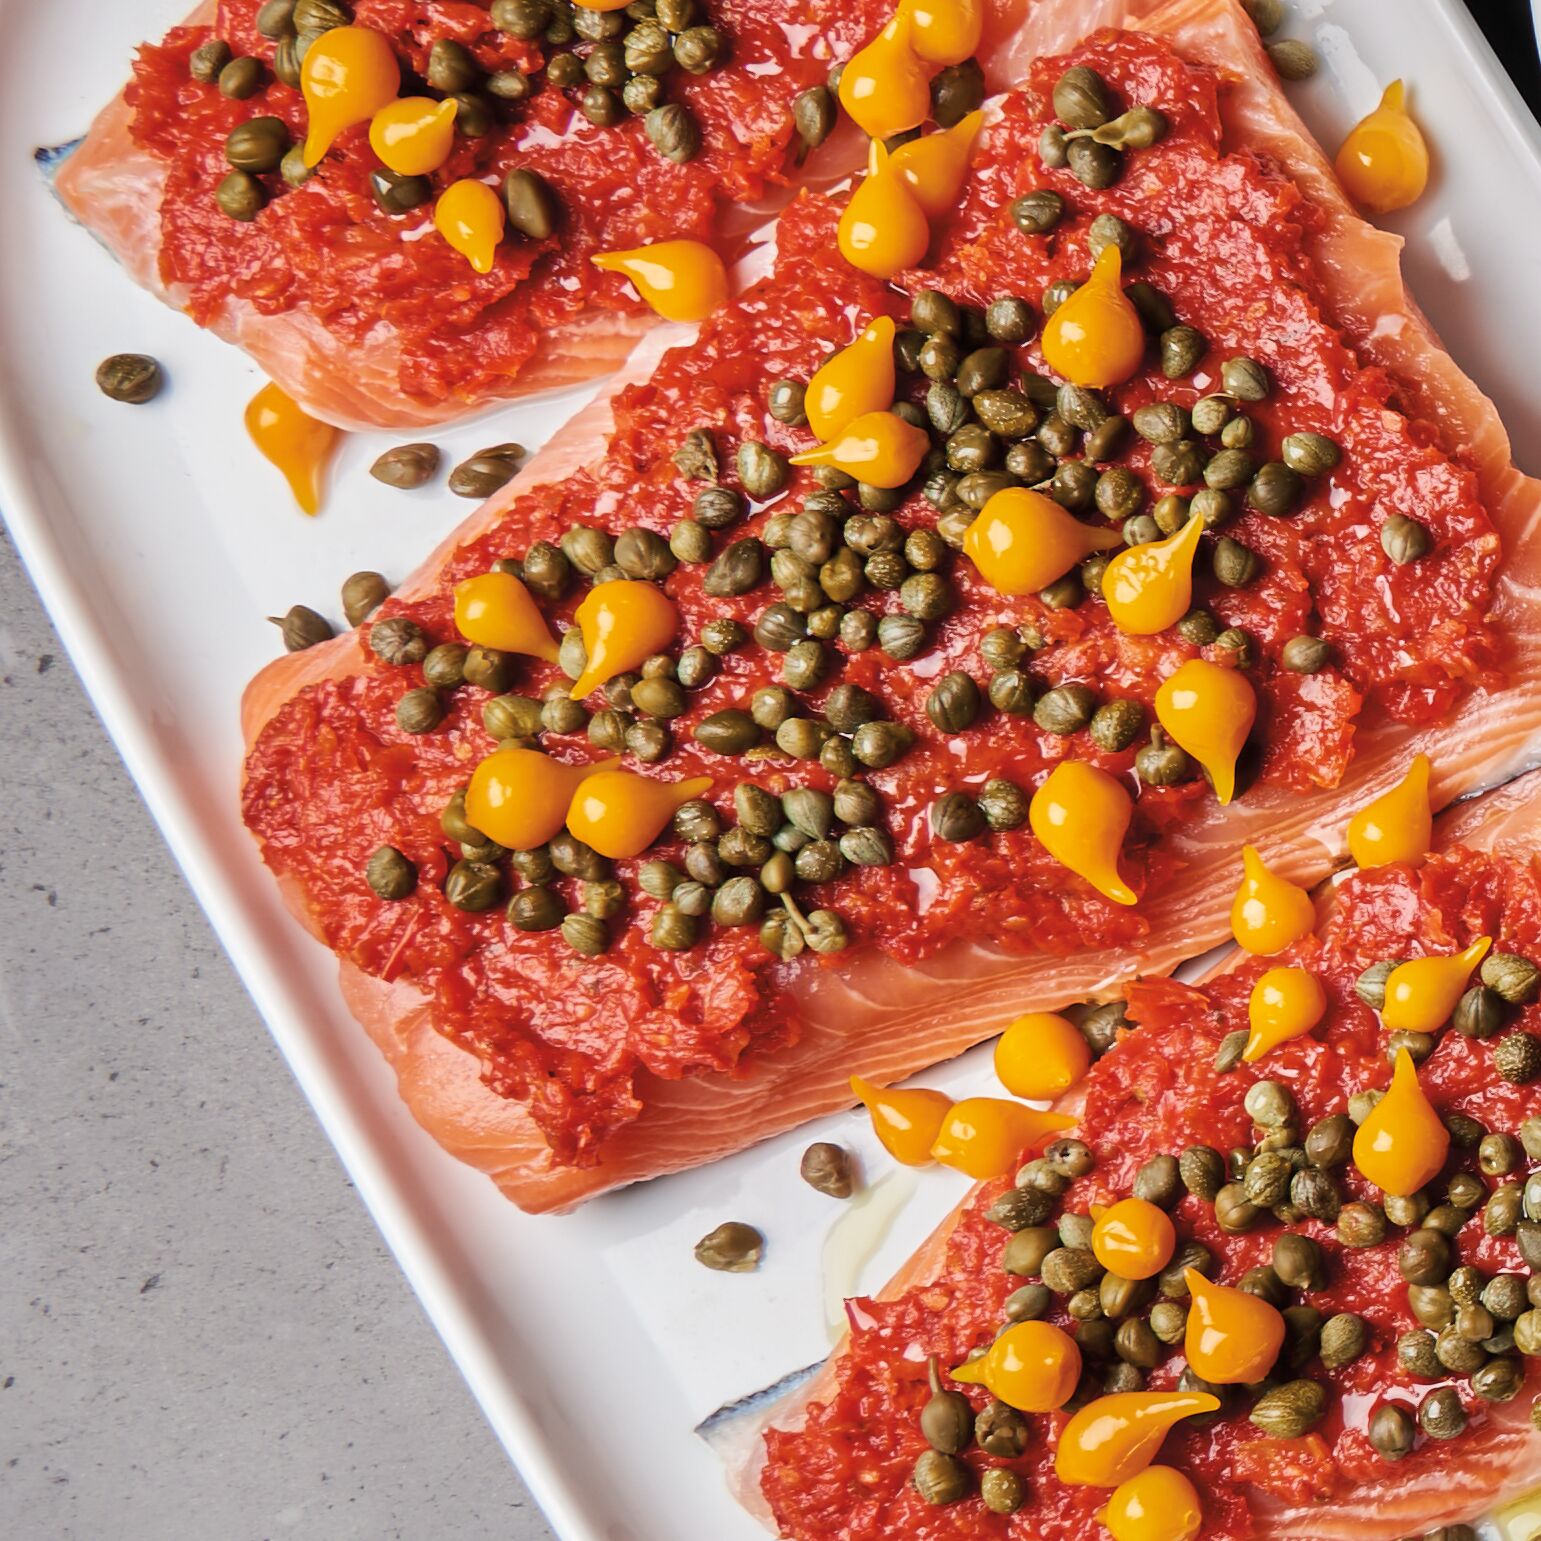 salmon fillets topped with roasted tomato spread, capers, and red peruvian pearl peppers